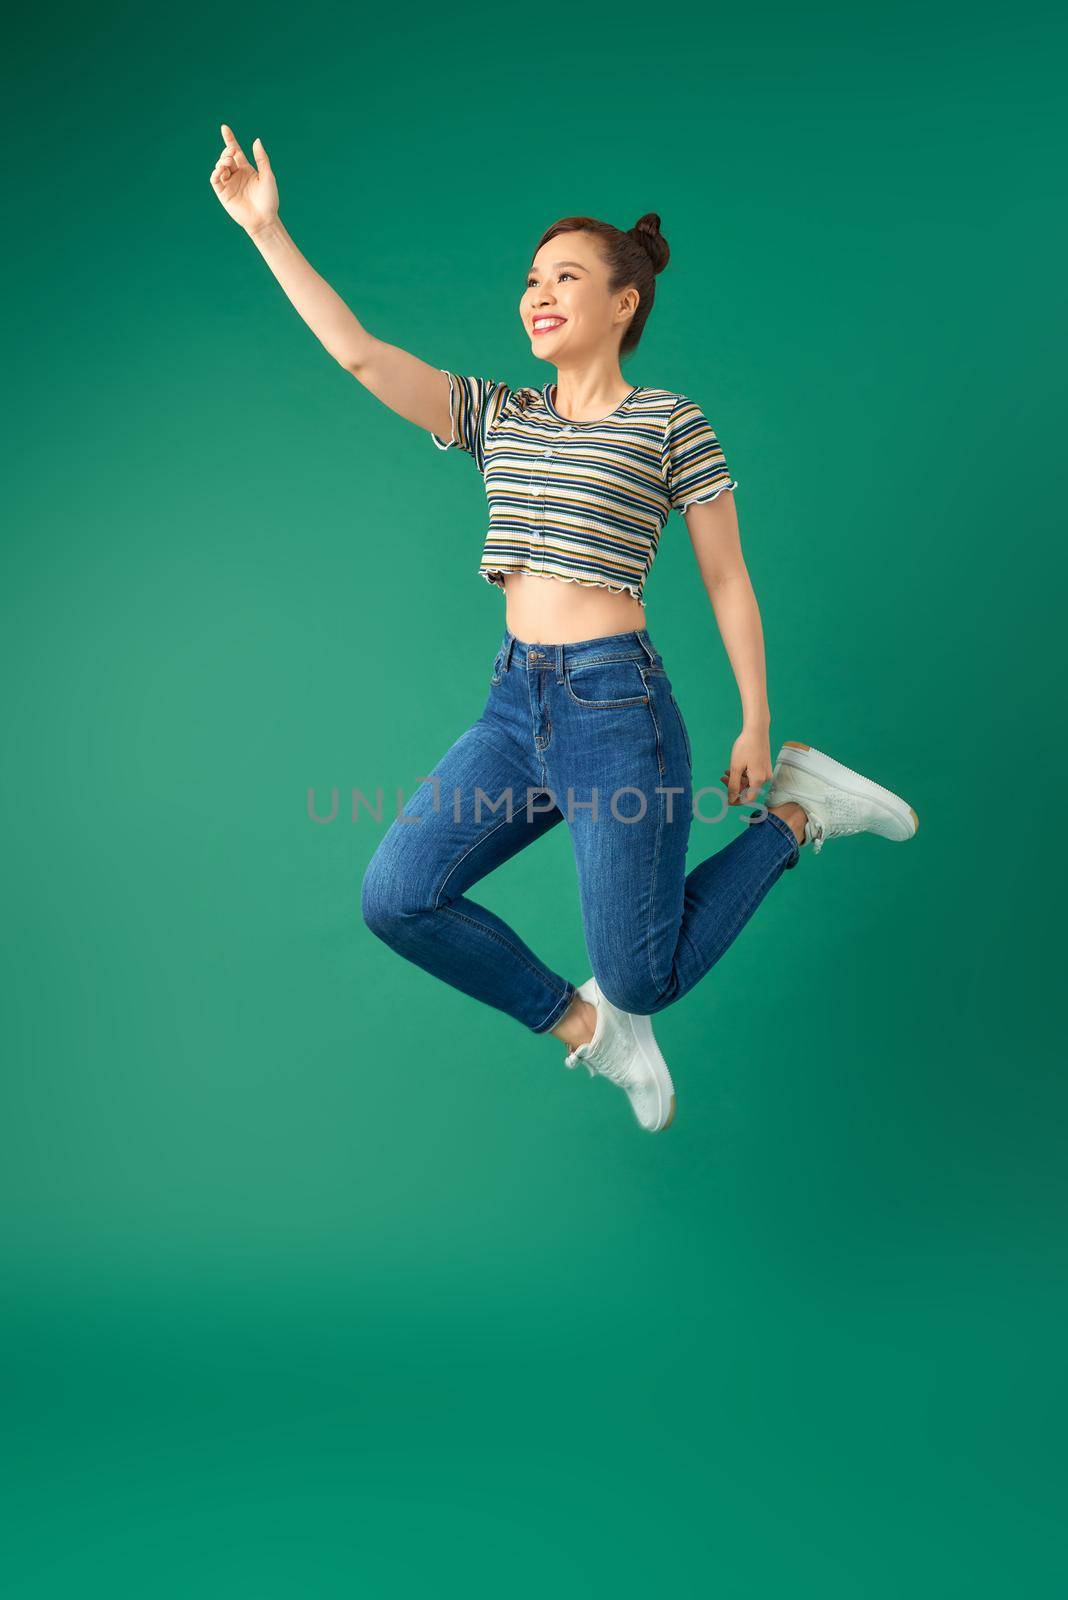 Happiness, freedom, motion and people concept - smiling young woman jumping in air over green background.